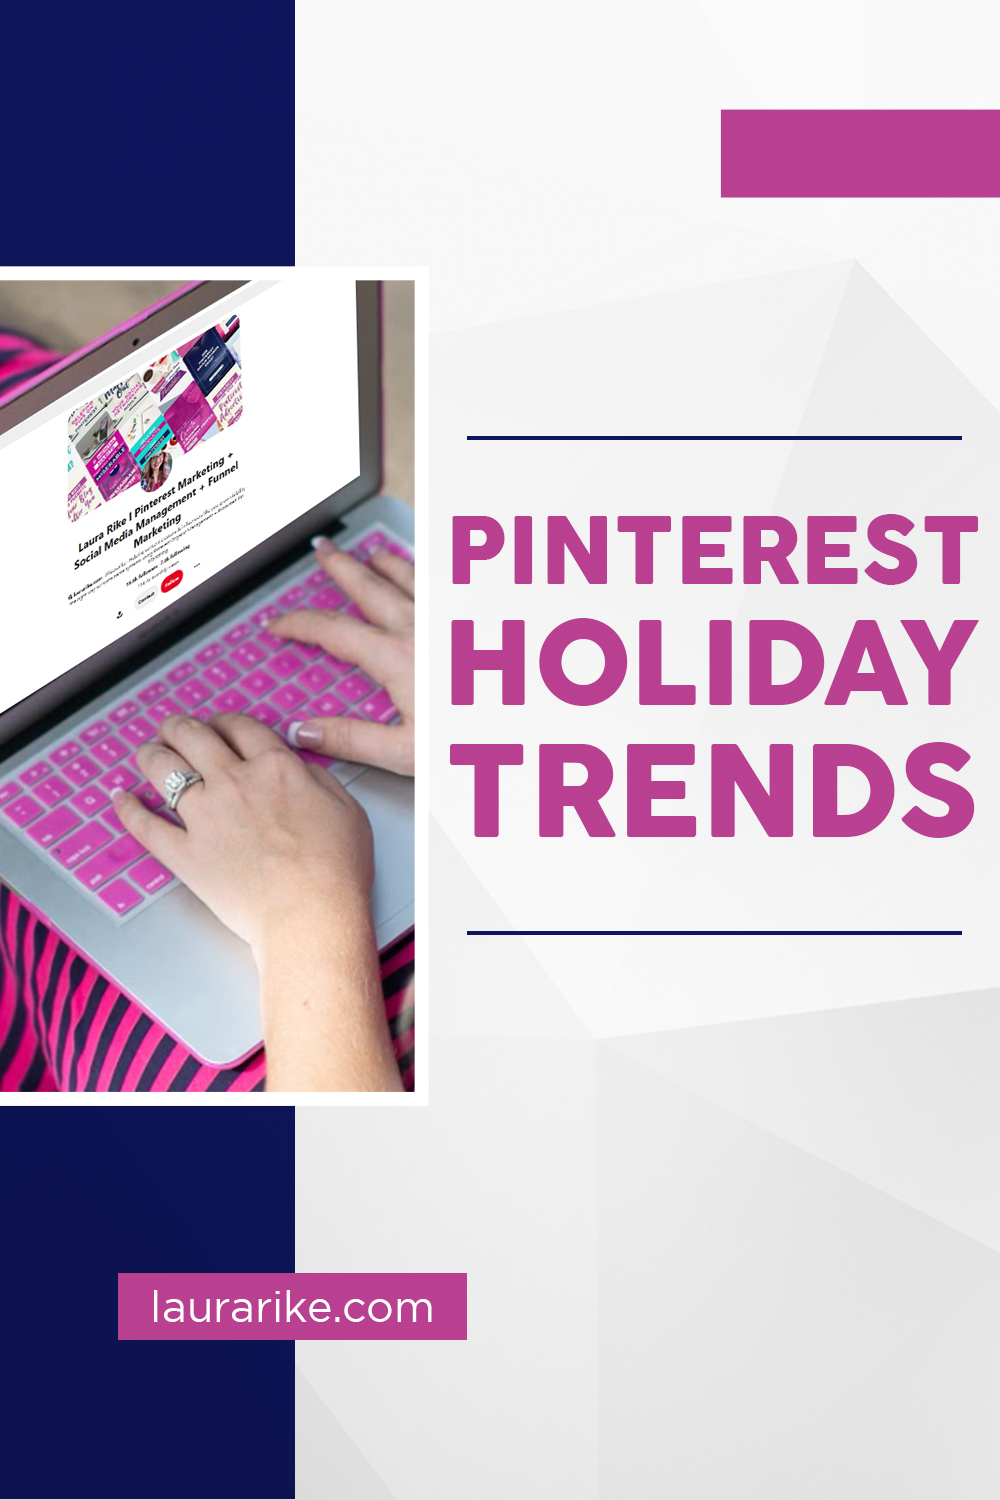 Pinterest Holiday Trends